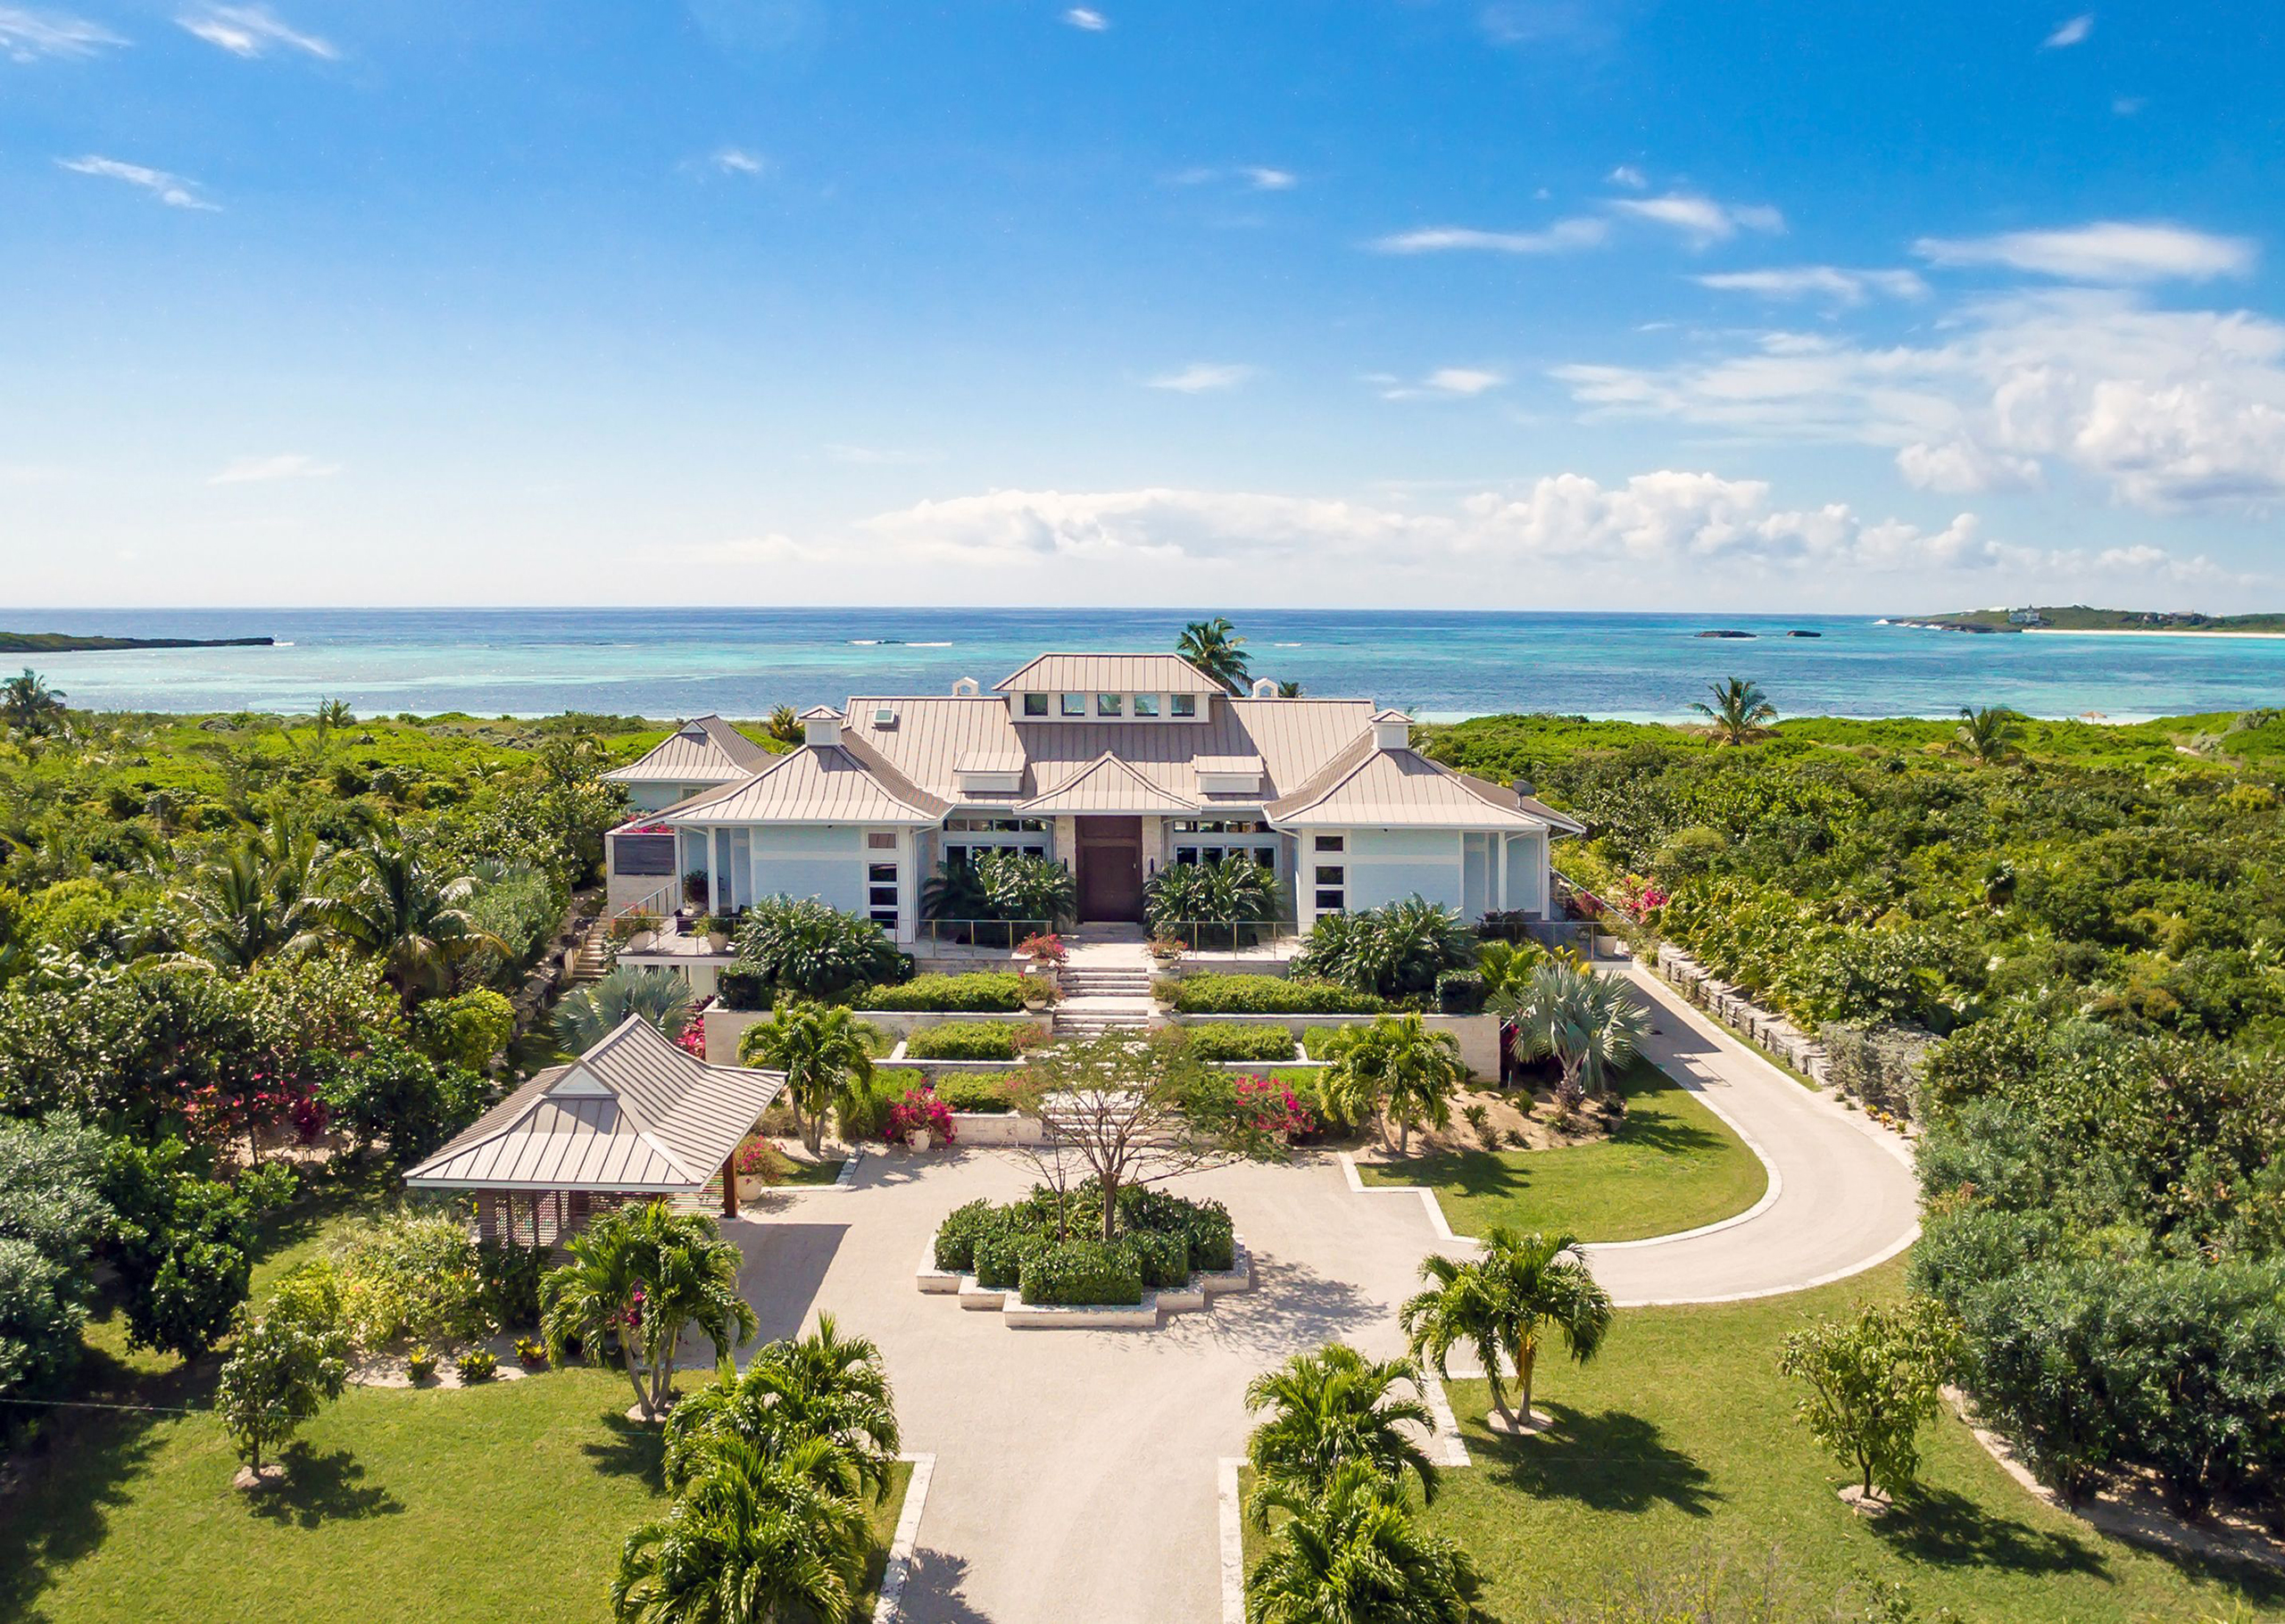 House in The Abaco Club private community